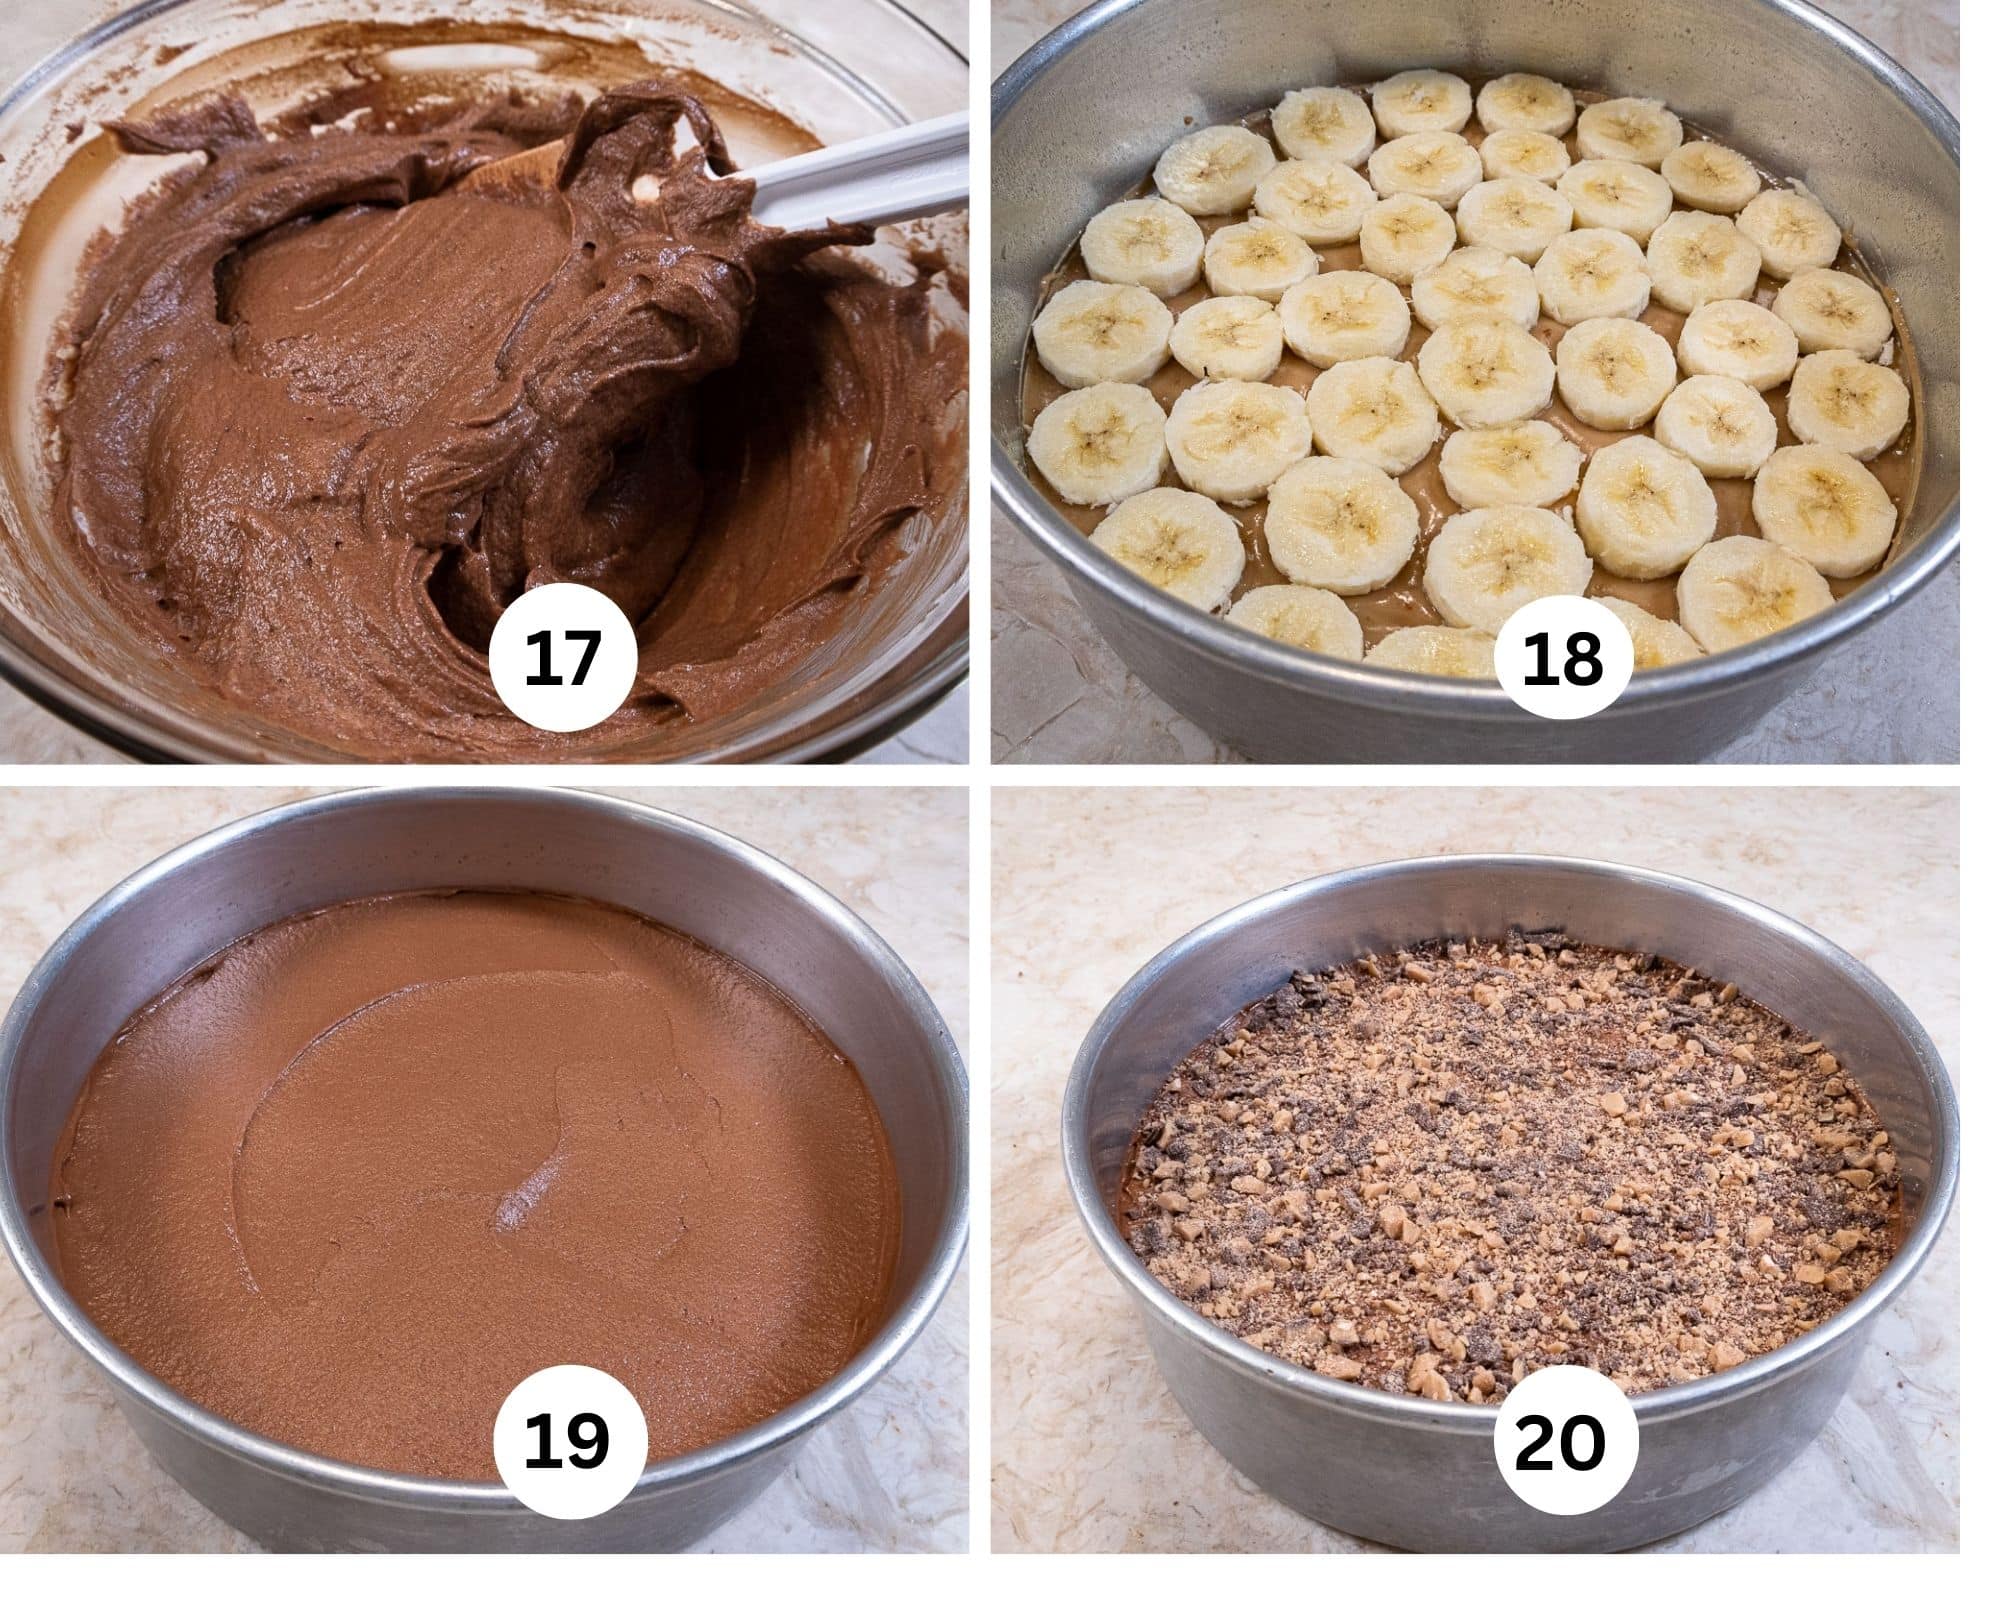 this collage, shows the chocolate and cream being folded together, the banana slices on top of the toffee, the mousse cover the bananas, and finally the brickle covering the mousse.